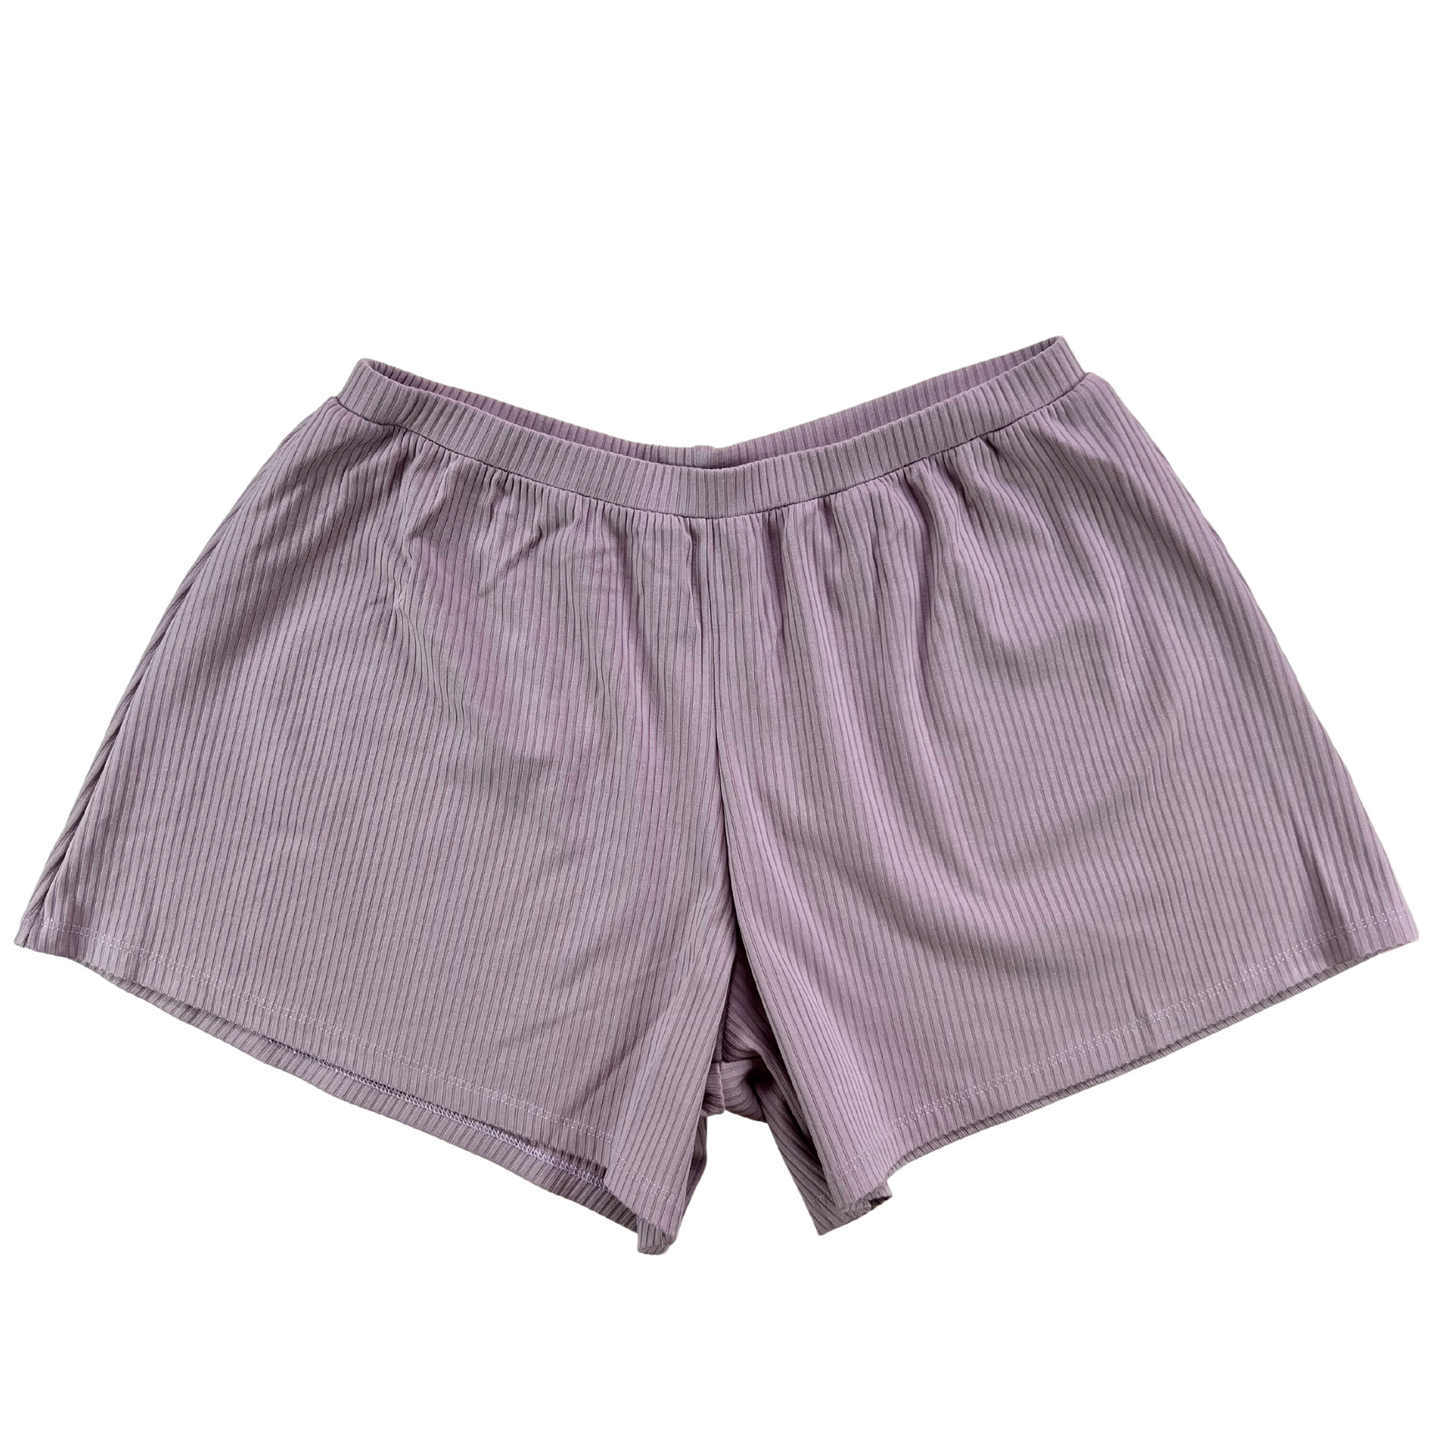 Forty Winks Ease Shorts